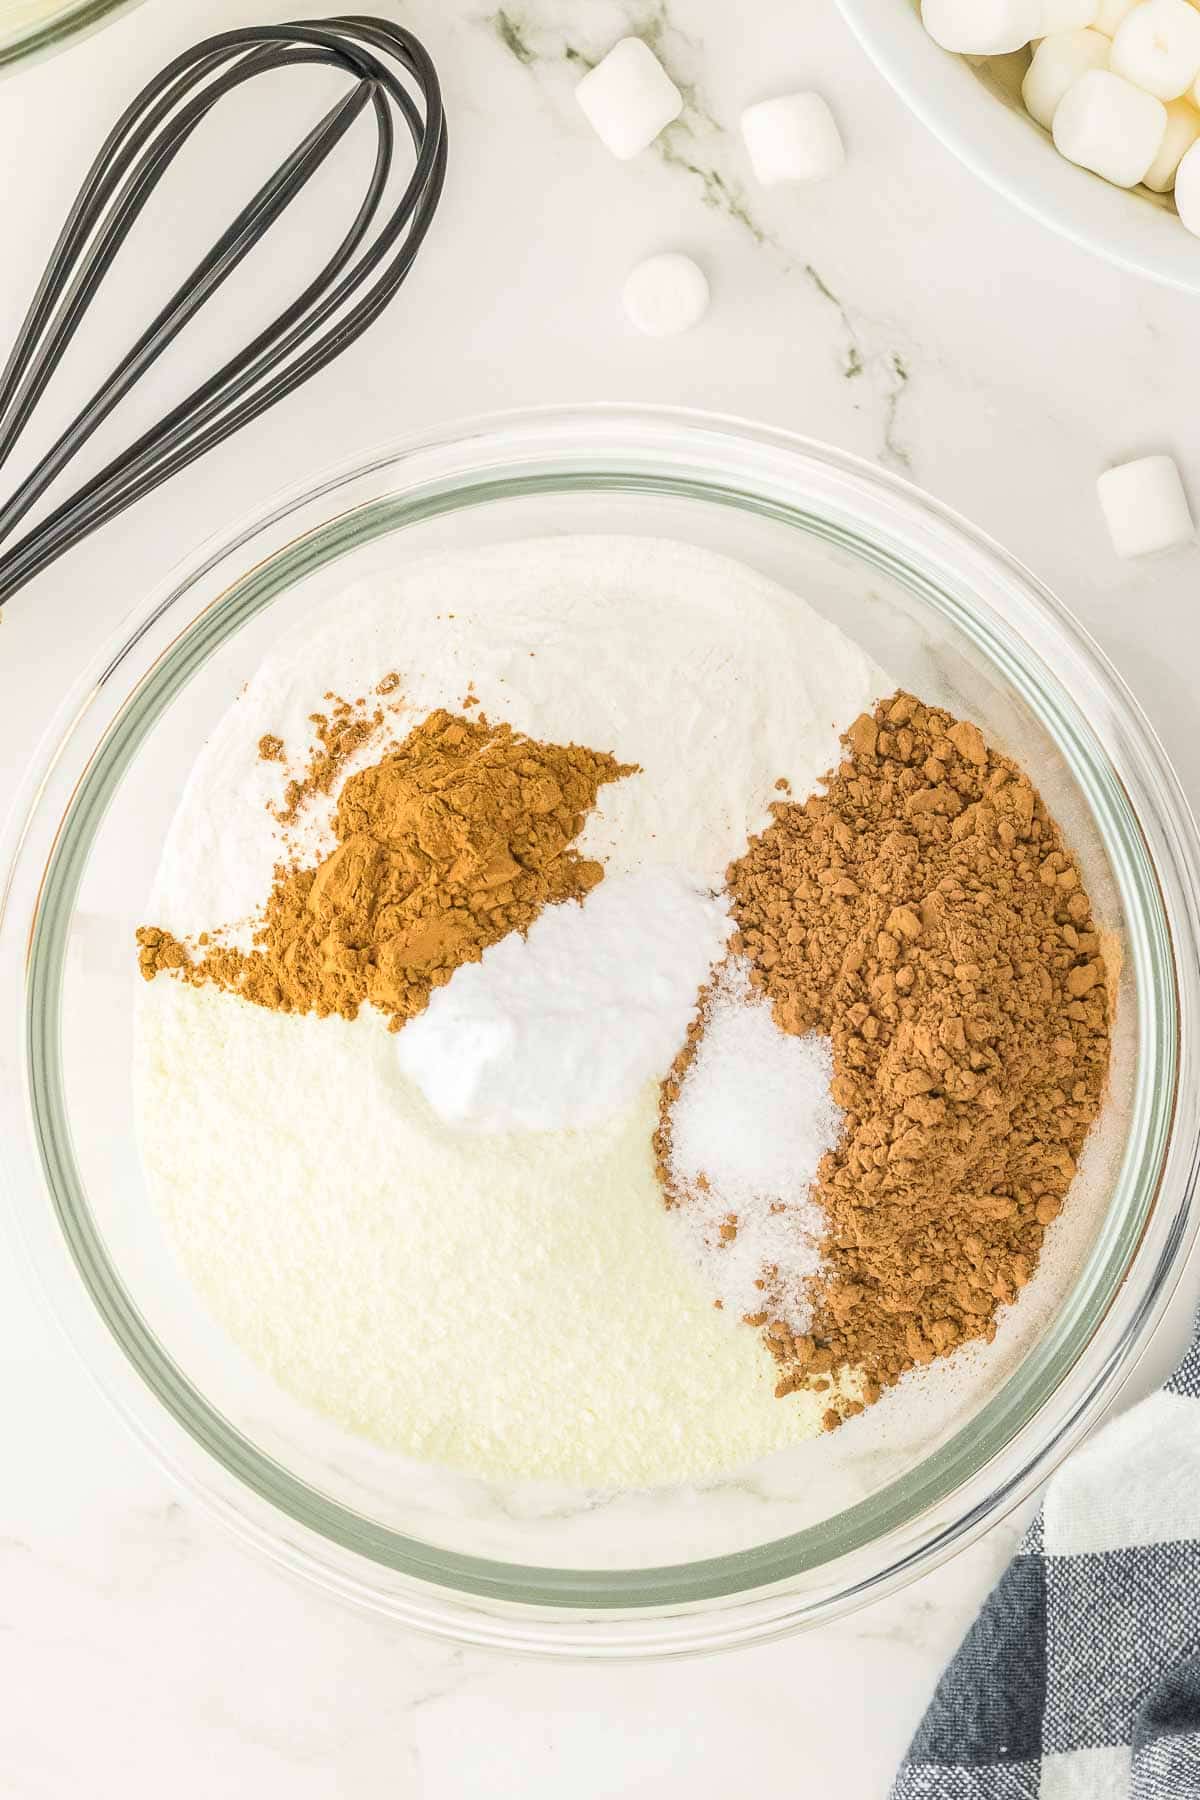 whisk together flour, dry milk, cocoa powder, baking soda, salt and cinnamon being mixed together in a large glass bowl.